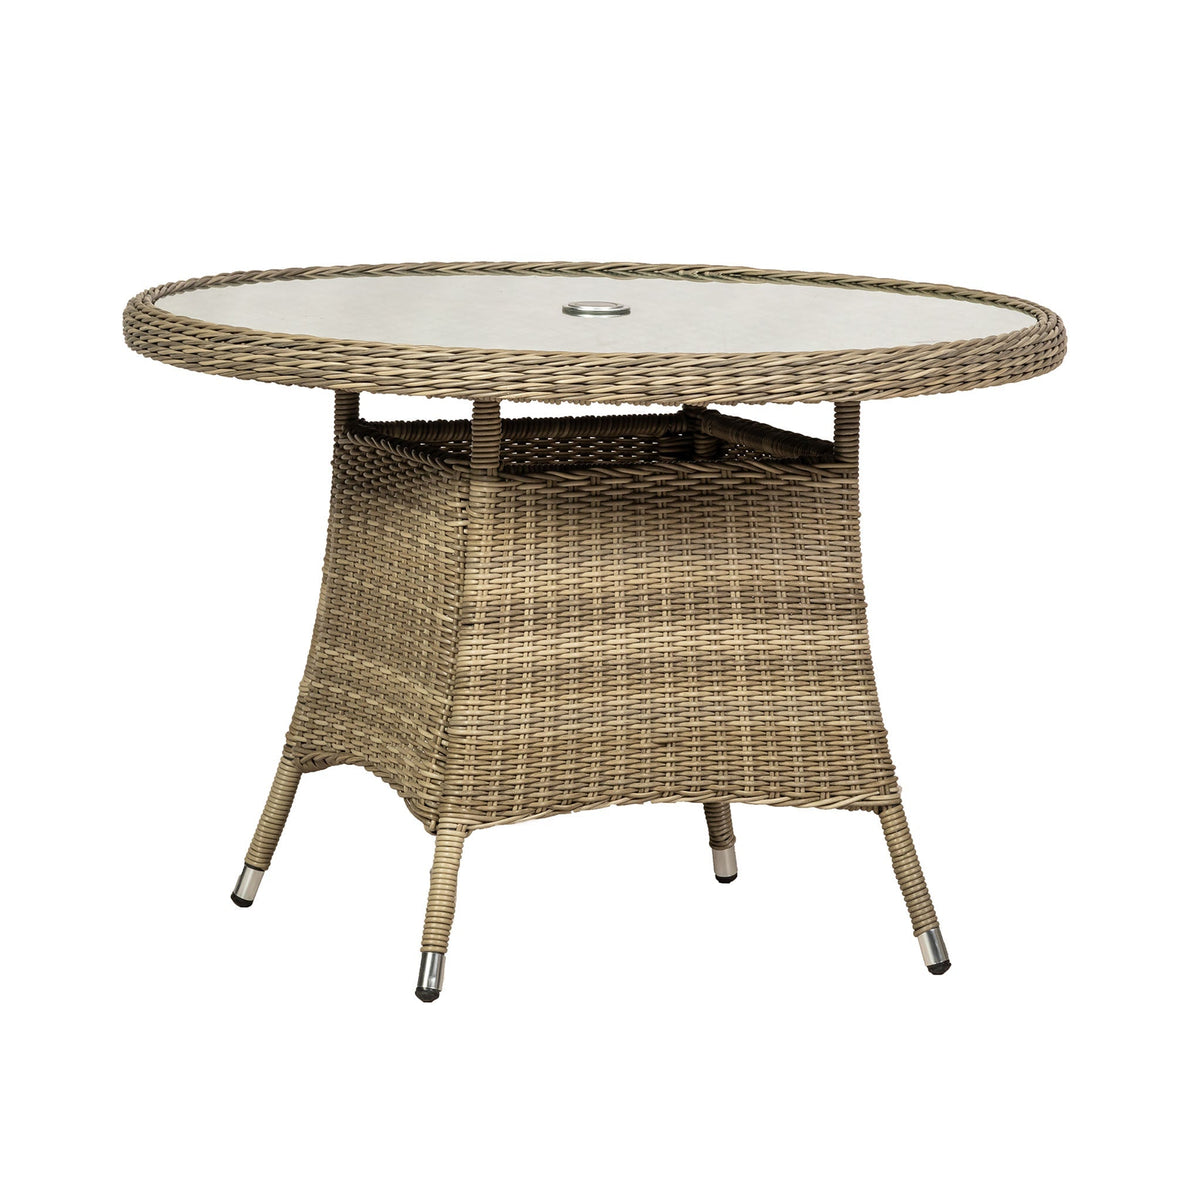 Wentworth 140cm 6 Seater Rattan Round Garden Dining Set Table with Glass Top